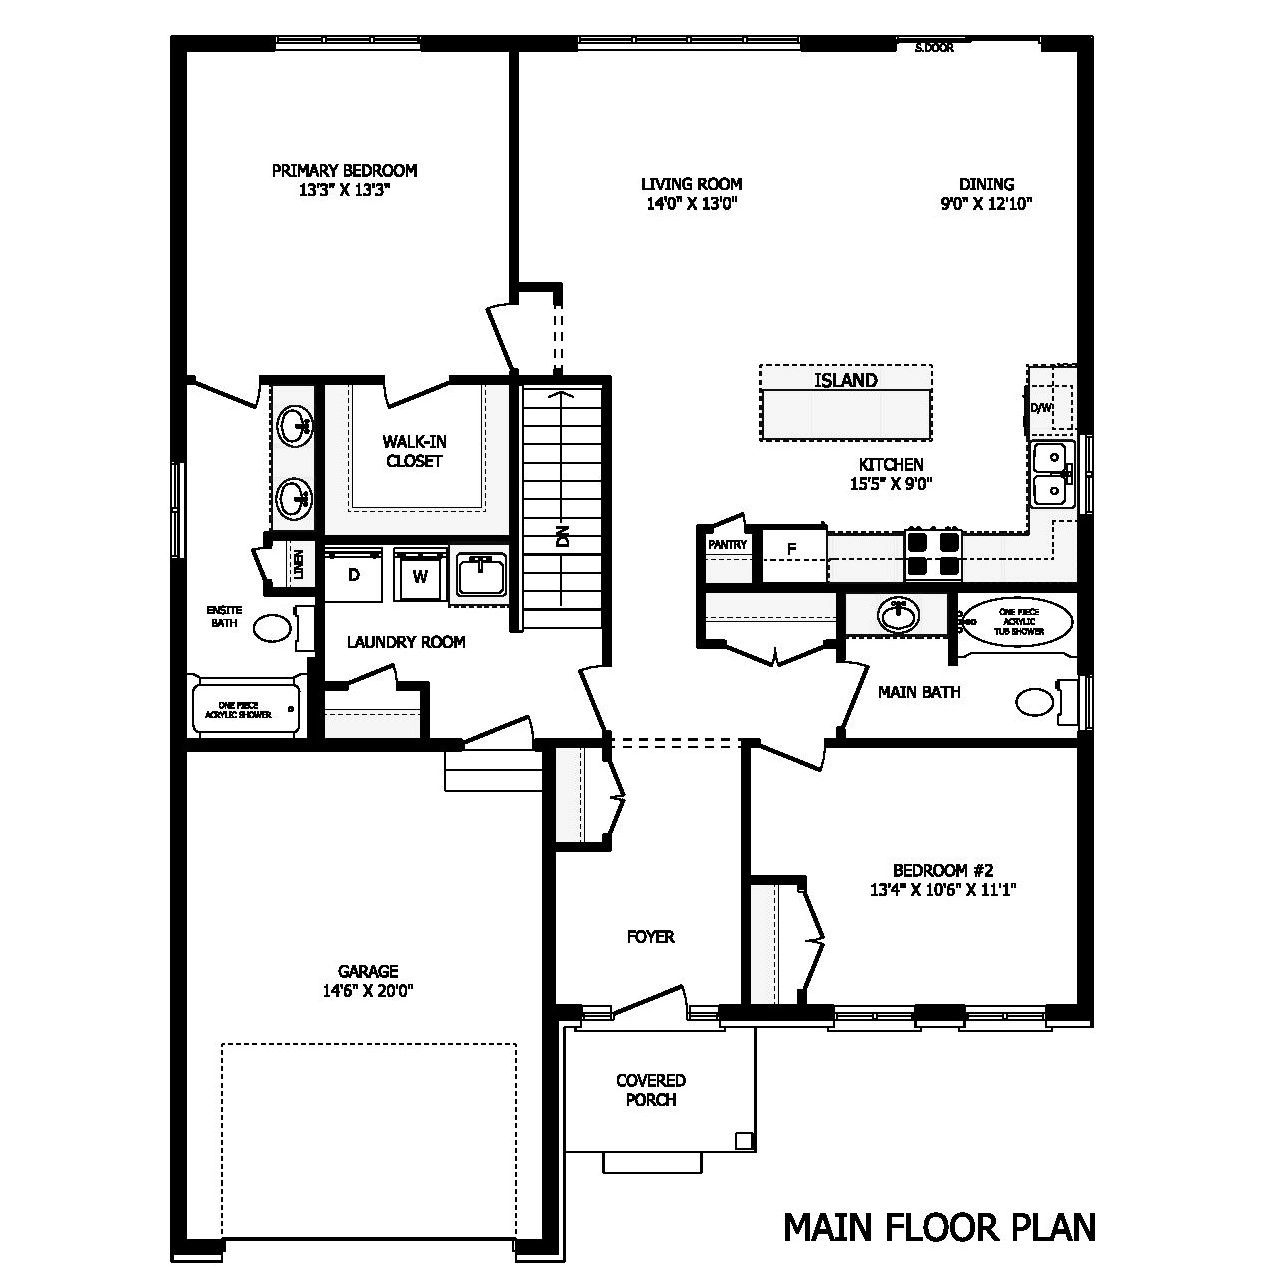 The Gibson Main Floor Plan
Greenwood Landings
New Homes in Coldwater